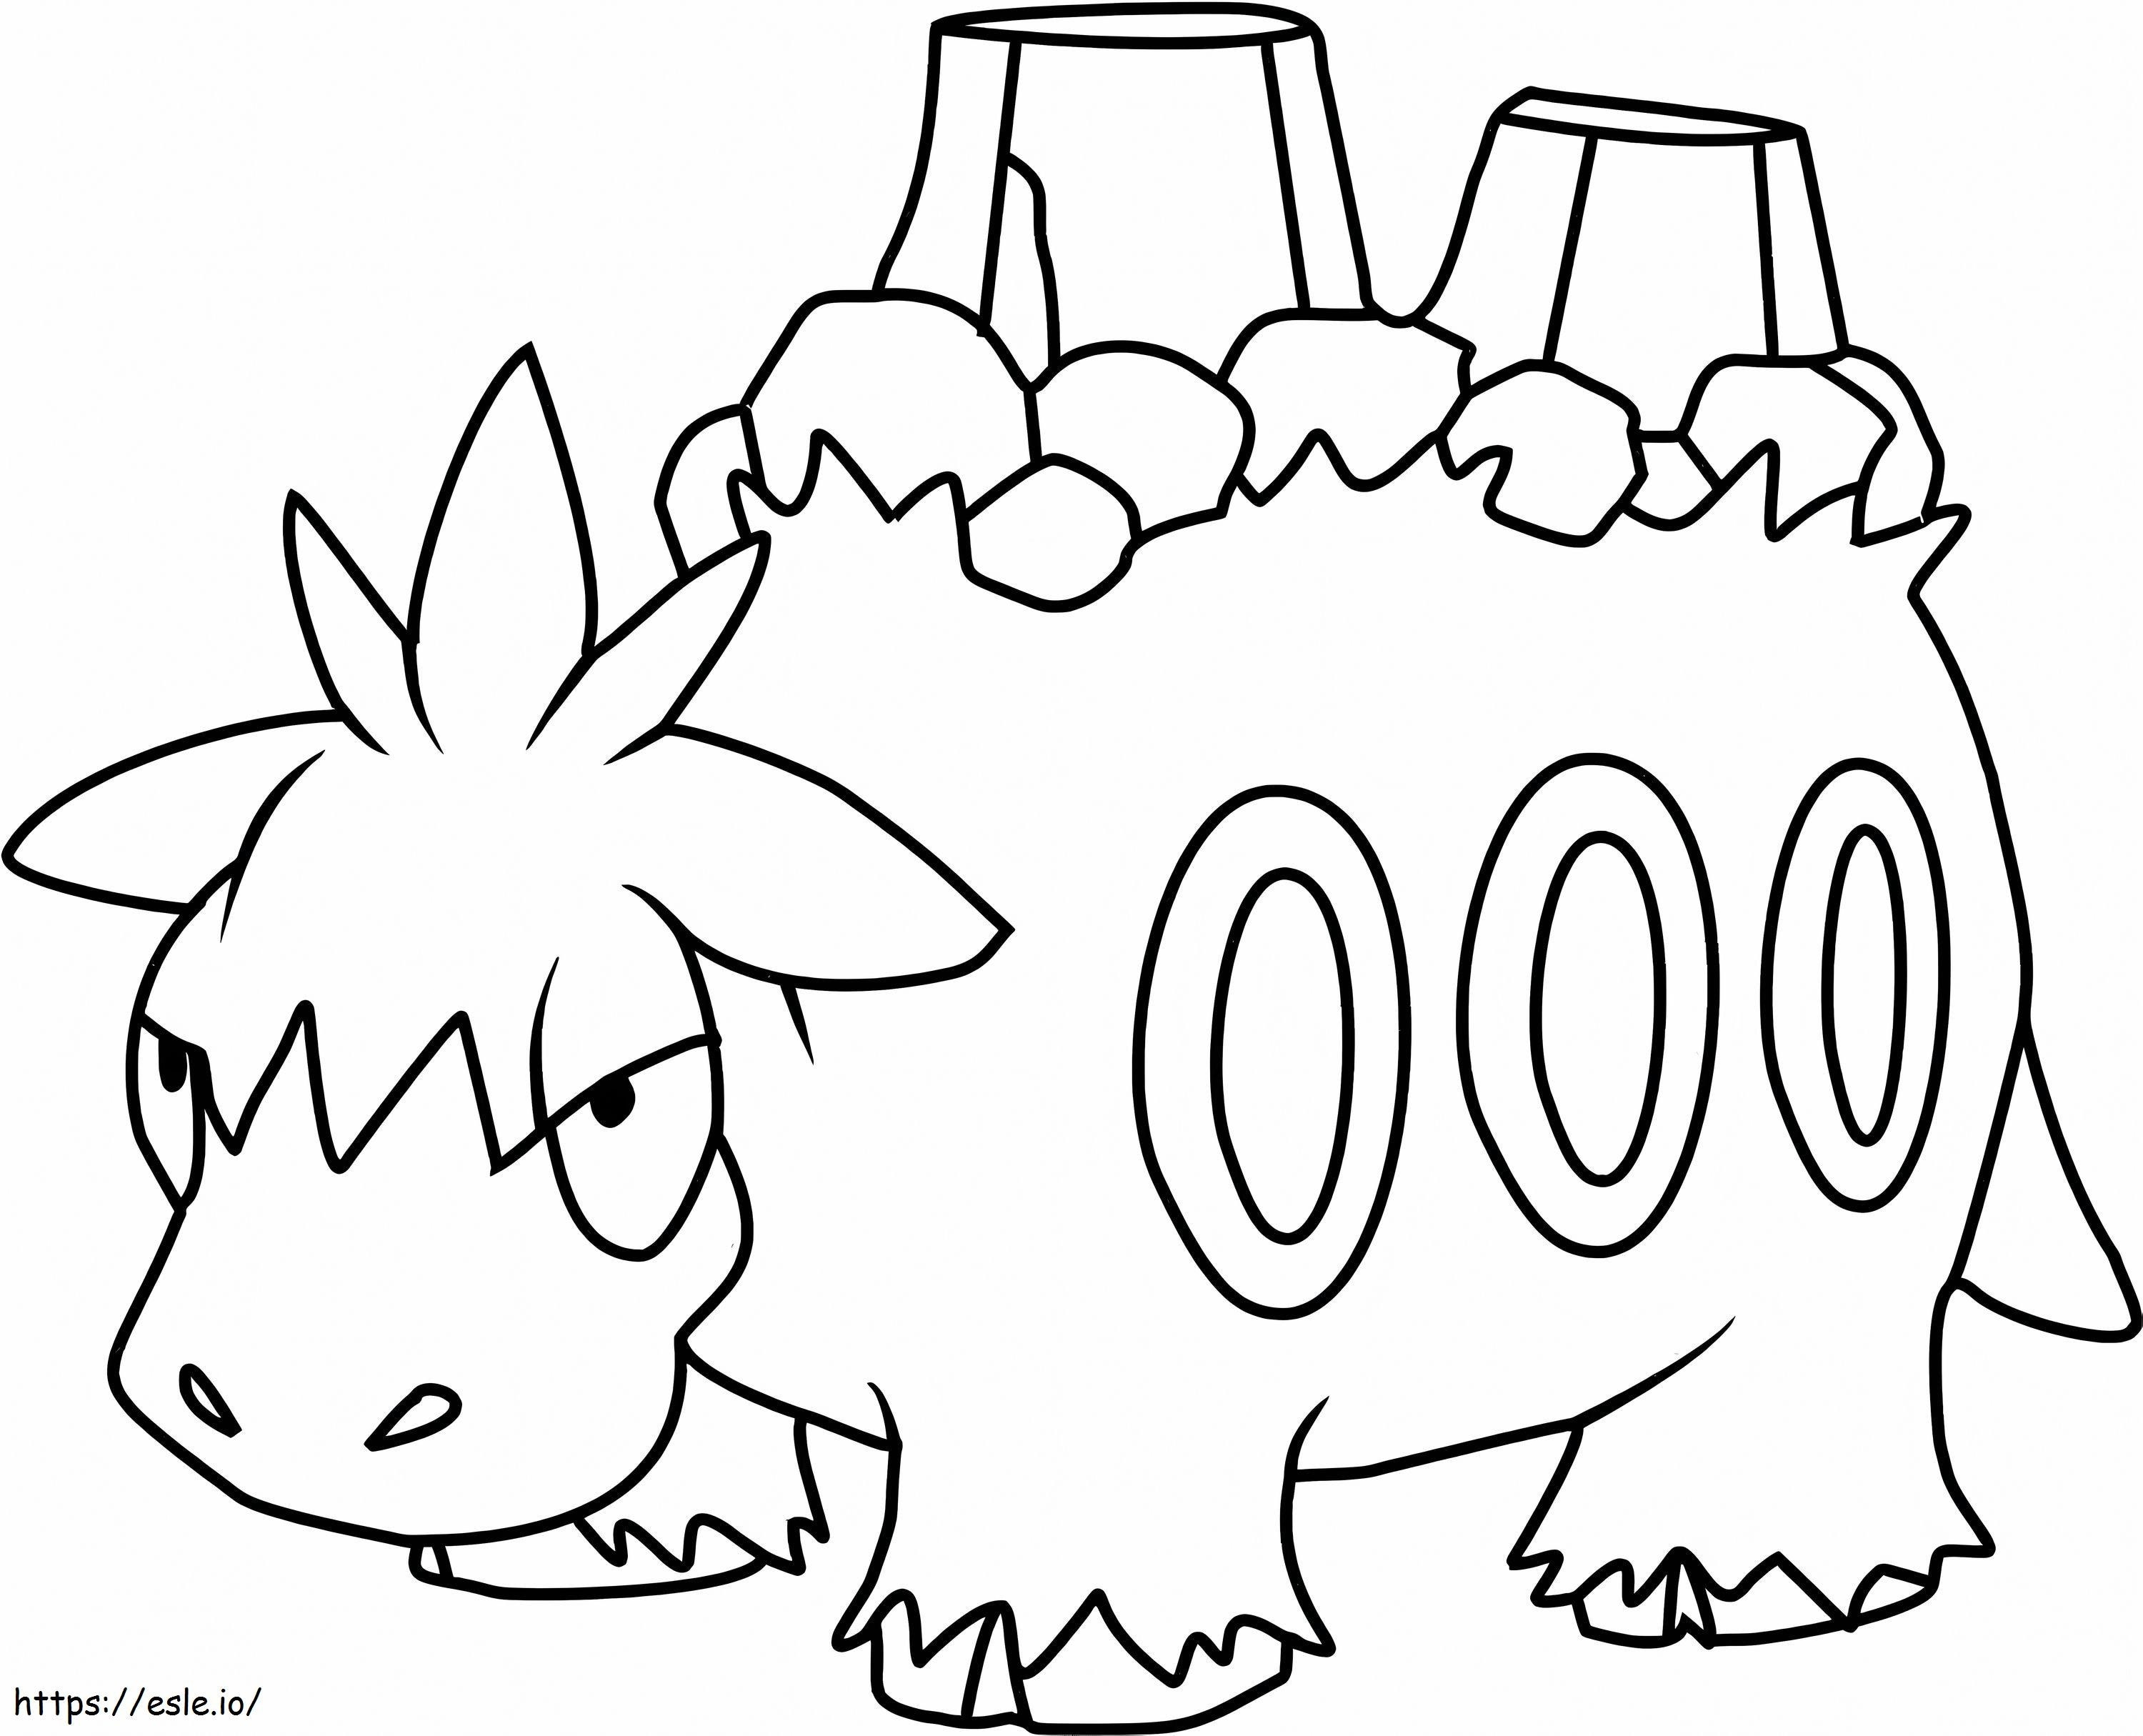 Camerupt coloring page